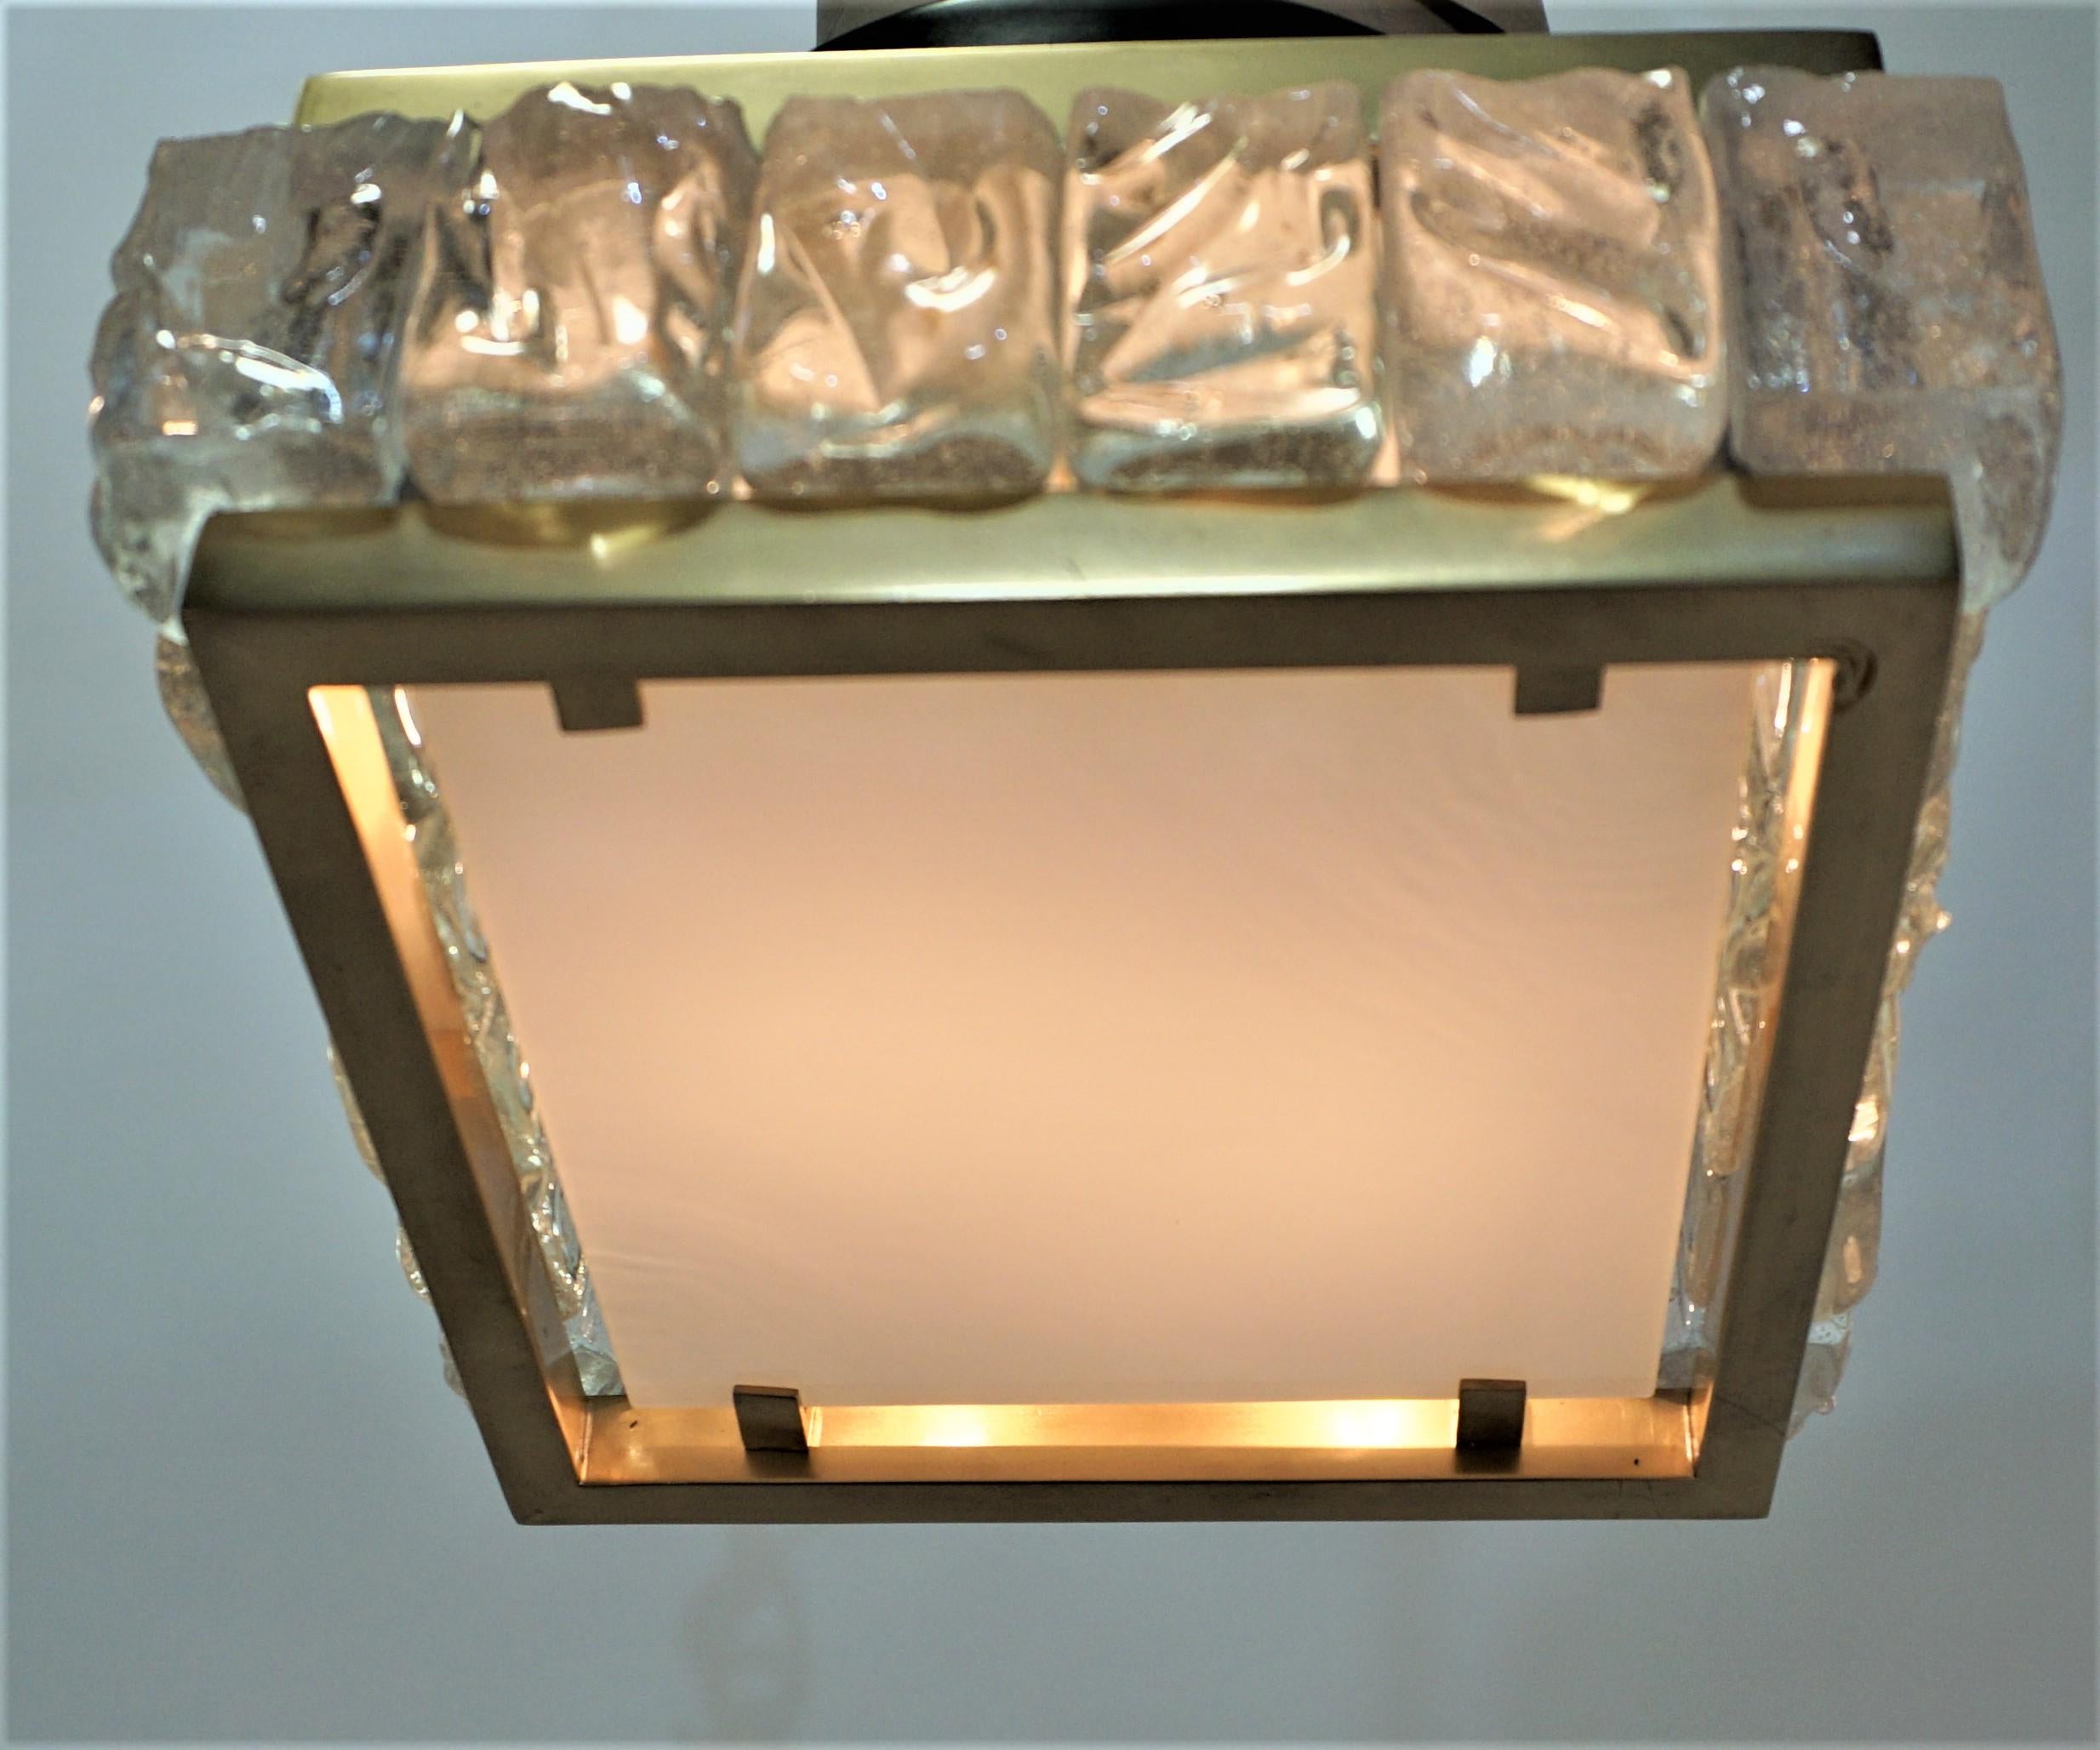 Petite square design in a ice shape glass panels framed in bronze with white glass diffusing at bottom. 
Two lights 75 watts each, bulbs are included.